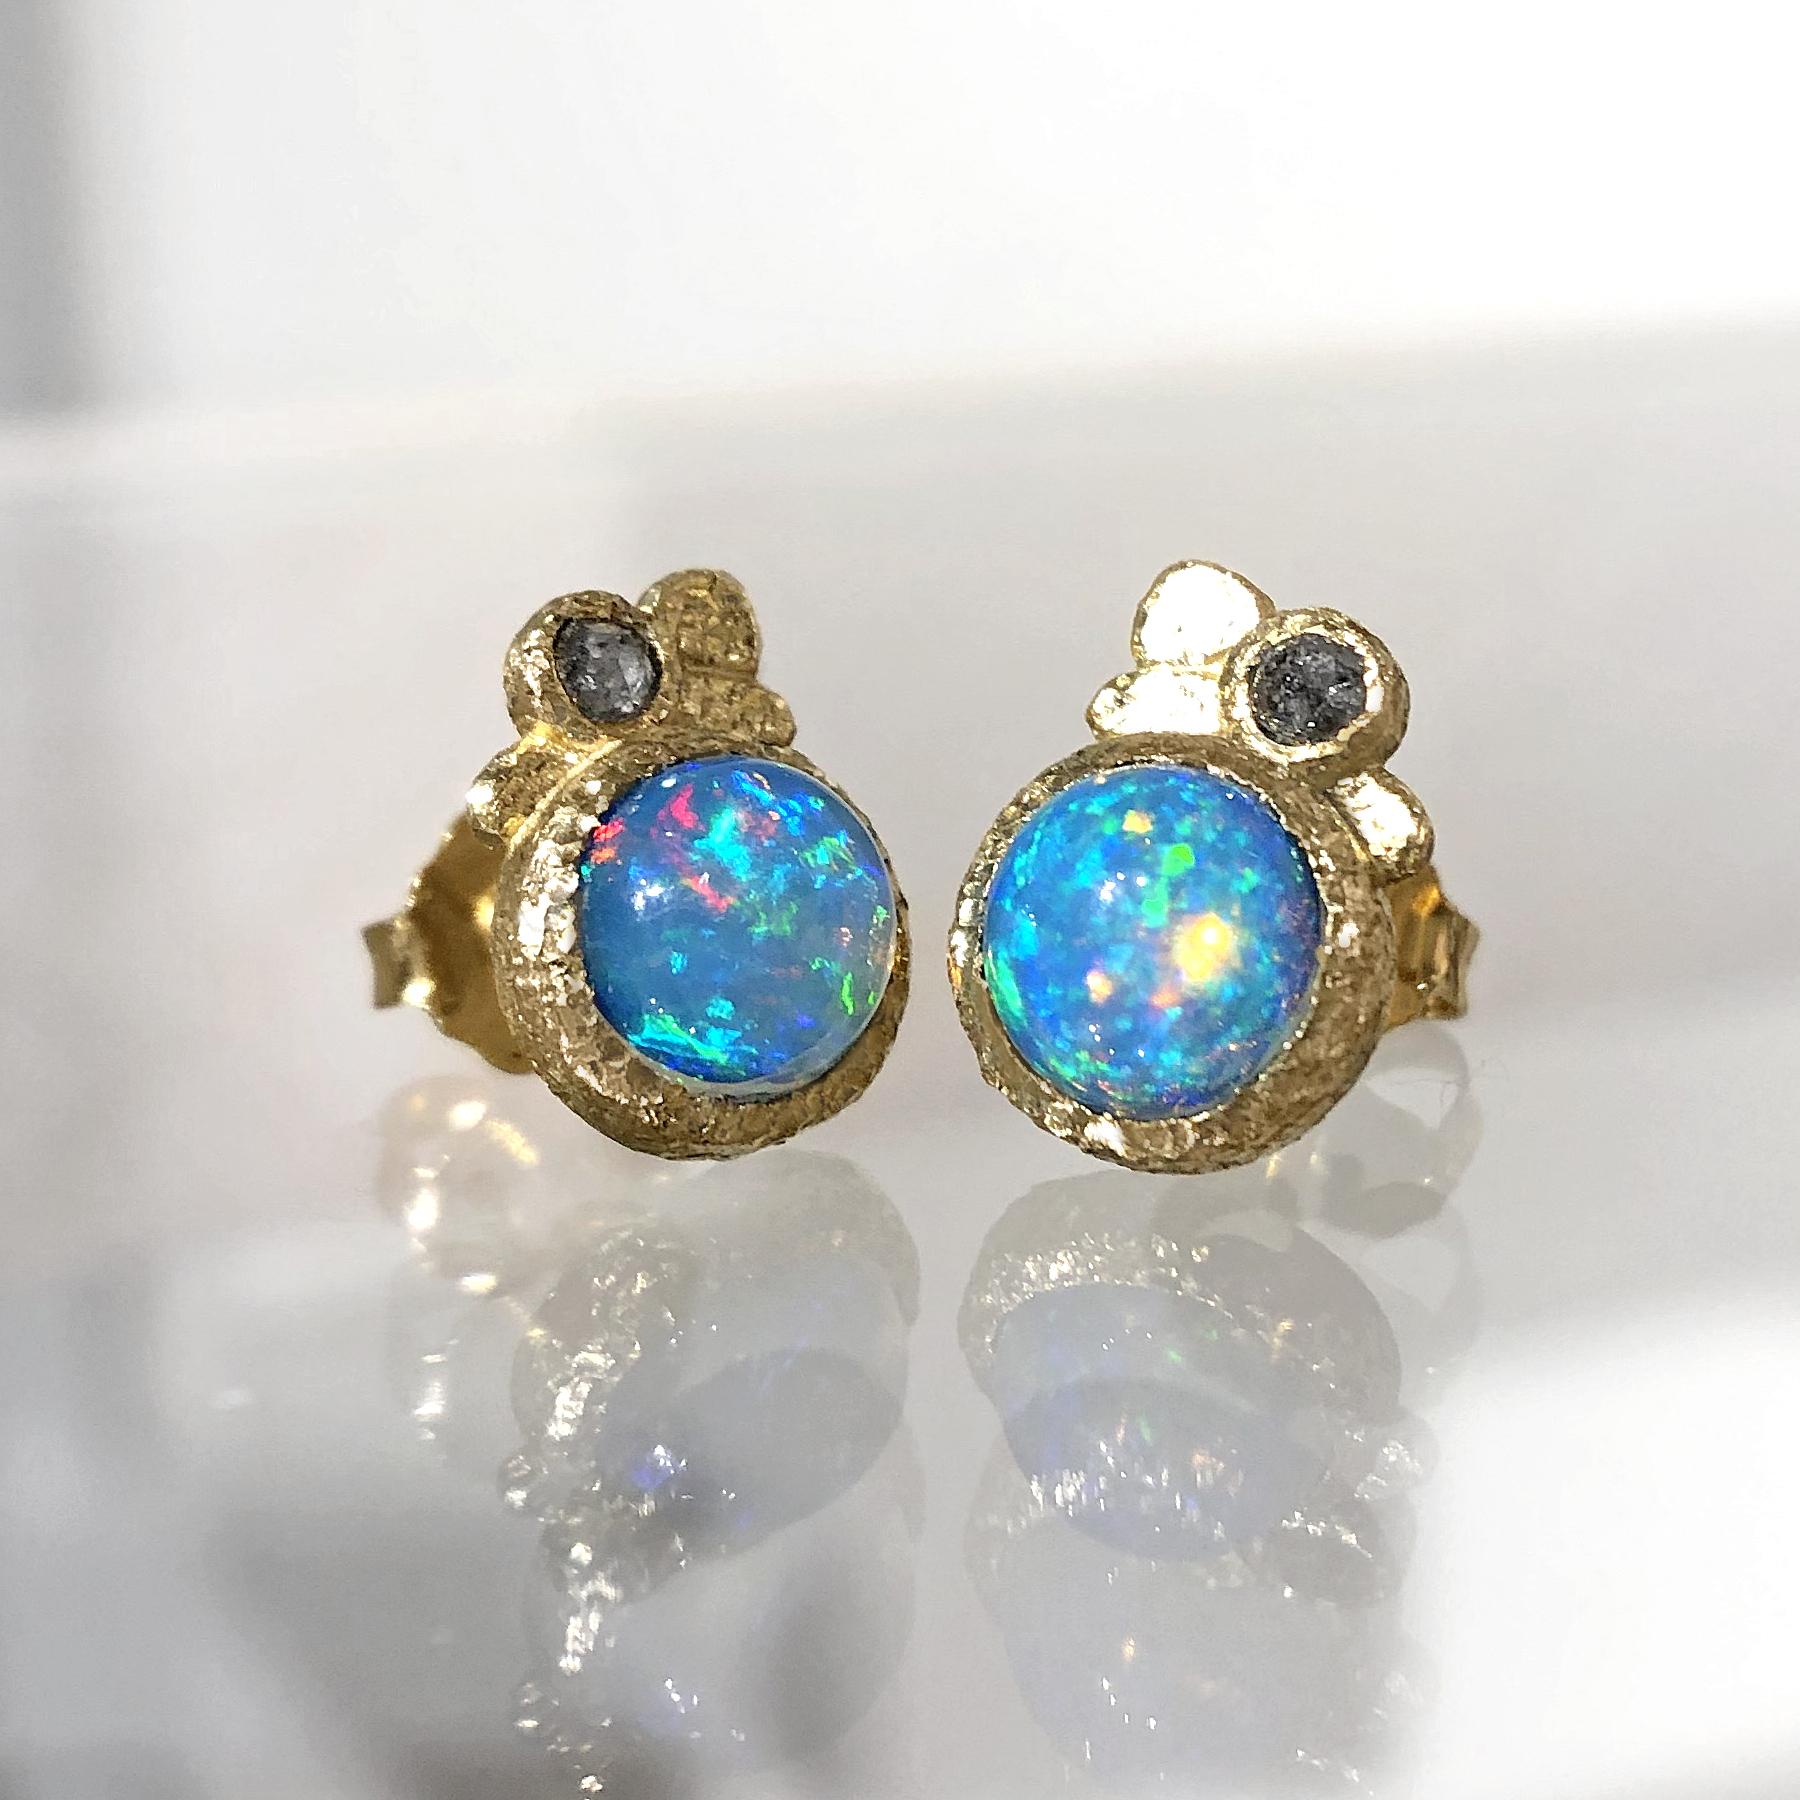 One of a Kind Earrings handcrafted by jewelry maker Rona Fisher featuring a matched pair of fiery deep blue Ethiopian opals with strong flashes of orange, red, and green, bezel-set in beautifully-textured 18k yellow gold and accented by a pair of